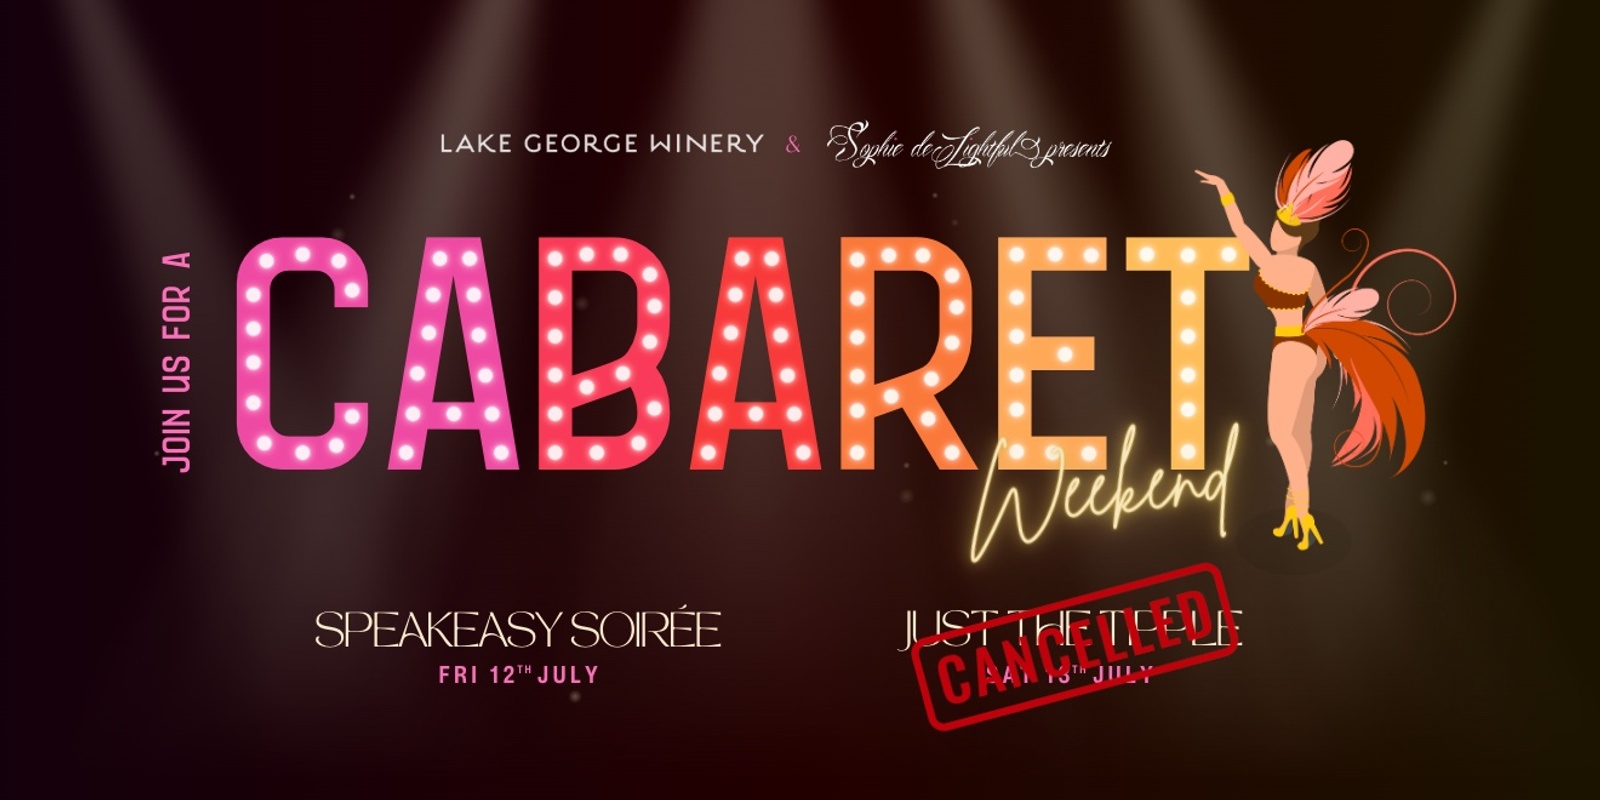 Banner image for Speakeasy Soiree @ Lake George Winery